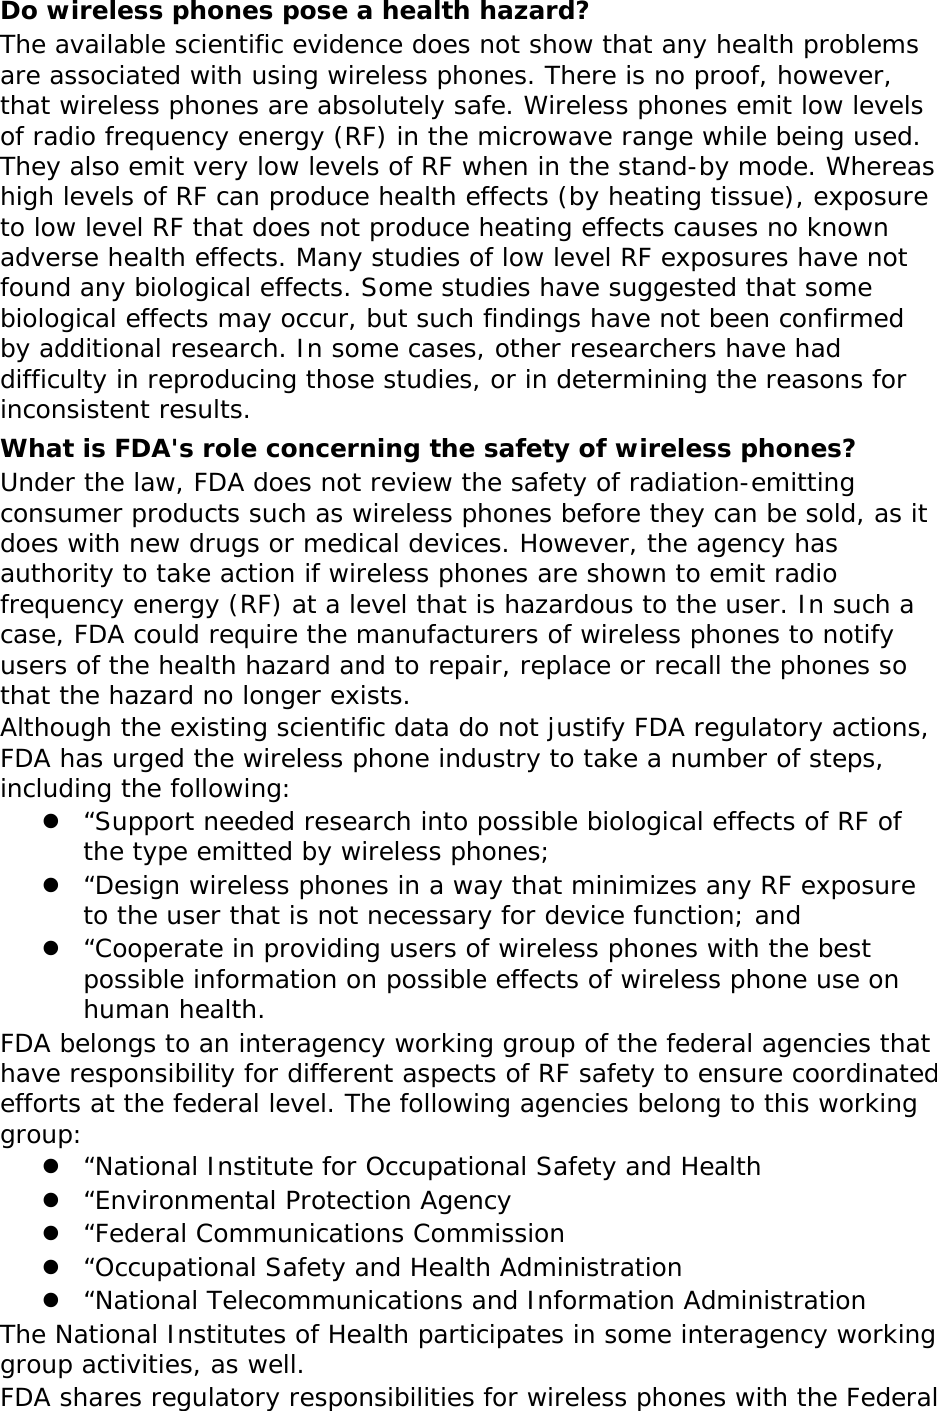 Do wireless phones pose a health hazard? The available scientific evidence does not show that any health problems are associated with using wireless phones. There is no proof, however, that wireless phones are absolutely safe. Wireless phones emit low levels of radio frequency energy (RF) in the microwave range while being used. They also emit very low levels of RF when in the stand-by mode. Whereas high levels of RF can produce health effects (by heating tissue), exposure to low level RF that does not produce heating effects causes no known adverse health effects. Many studies of low level RF exposures have not found any biological effects. Some studies have suggested that some biological effects may occur, but such findings have not been confirmed by additional research. In some cases, other researchers have had difficulty in reproducing those studies, or in determining the reasons for inconsistent results. What is FDA&apos;s role concerning the safety of wireless phones? Under the law, FDA does not review the safety of radiation-emitting consumer products such as wireless phones before they can be sold, as it does with new drugs or medical devices. However, the agency has authority to take action if wireless phones are shown to emit radio frequency energy (RF) at a level that is hazardous to the user. In such a case, FDA could require the manufacturers of wireless phones to notify users of the health hazard and to repair, replace or recall the phones so that the hazard no longer exists. Although the existing scientific data do not justify FDA regulatory actions, FDA has urged the wireless phone industry to take a number of steps, including the following:  “Support needed research into possible biological effects of RF of the type emitted by wireless phones;  “Design wireless phones in a way that minimizes any RF exposure to the user that is not necessary for device function; and  “Cooperate in providing users of wireless phones with the best possible information on possible effects of wireless phone use on human health. FDA belongs to an interagency working group of the federal agencies that have responsibility for different aspects of RF safety to ensure coordinated efforts at the federal level. The following agencies belong to this working group:  “National Institute for Occupational Safety and Health  “Environmental Protection Agency  “Federal Communications Commission  “Occupational Safety and Health Administration  “National Telecommunications and Information Administration The National Institutes of Health participates in some interagency working group activities, as well. FDA shares regulatory responsibilities for wireless phones with the Federal 